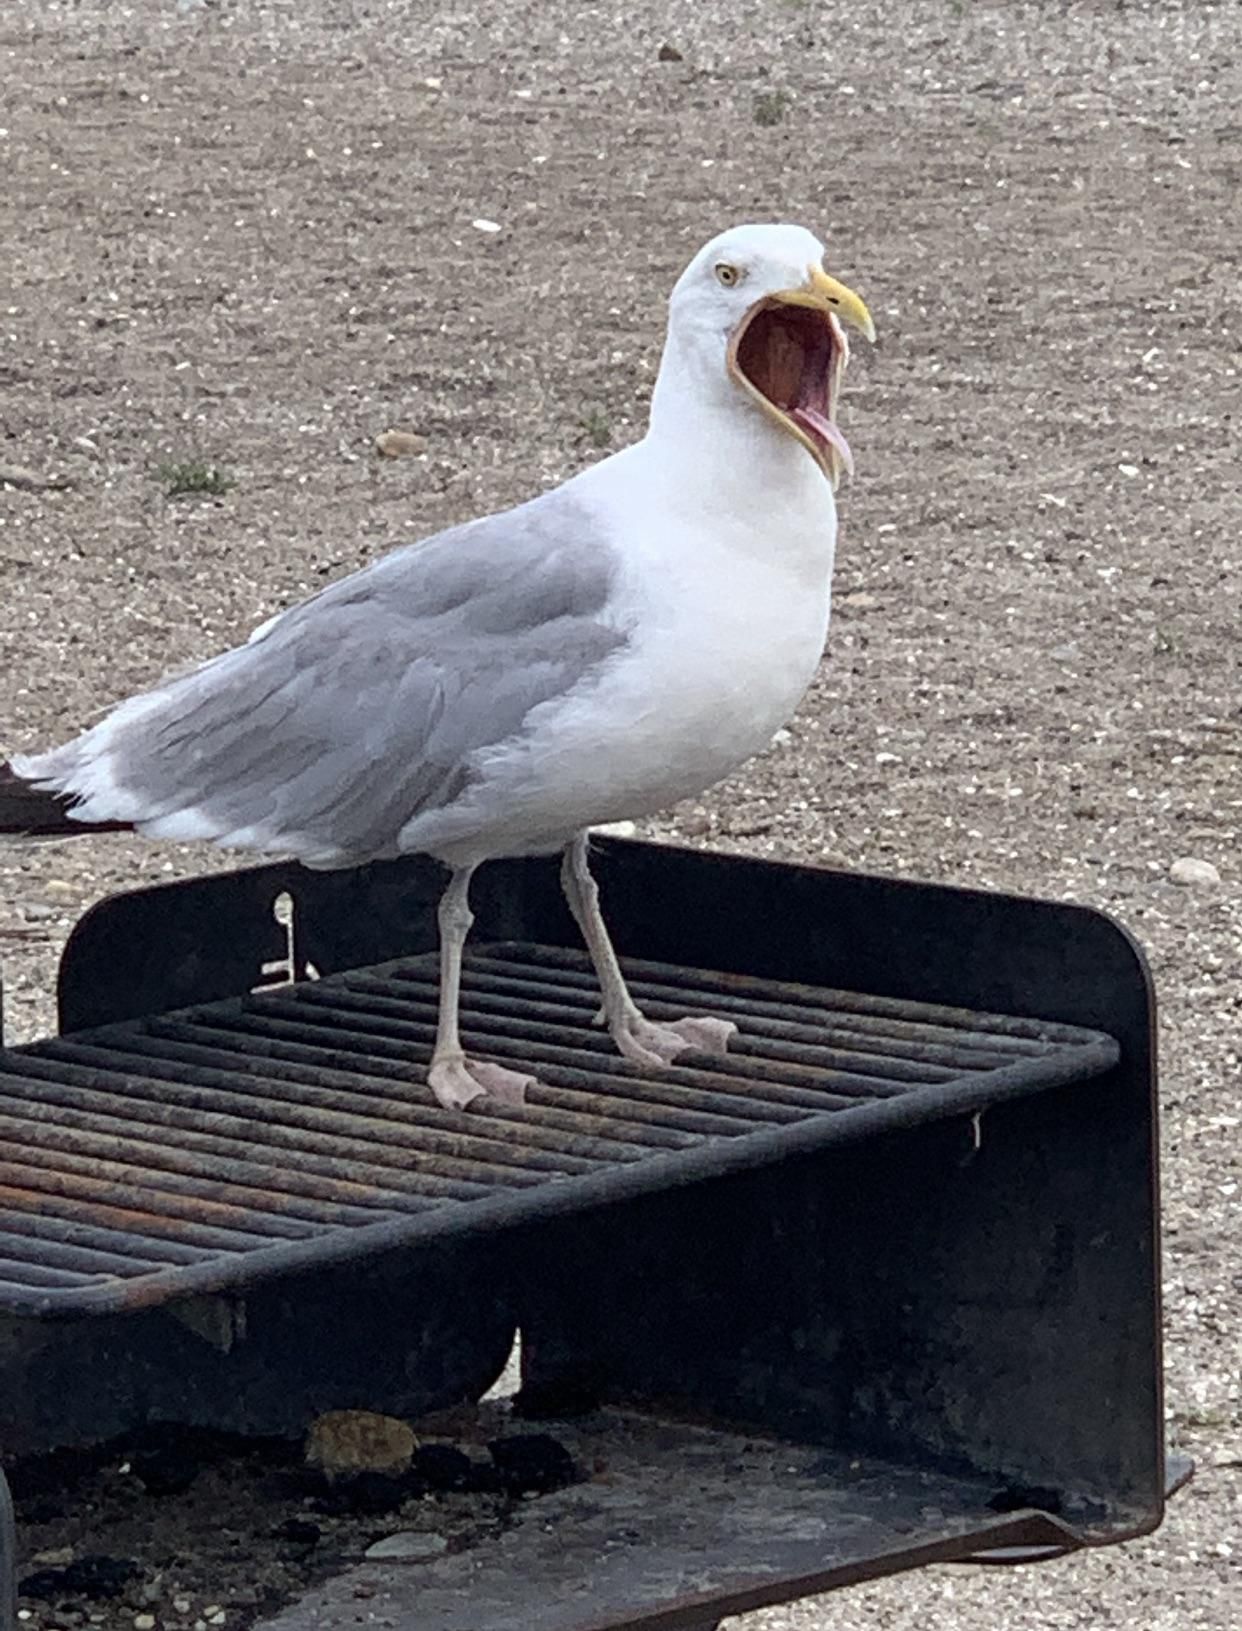 My mom took a picture of a seagull yelling and I thought it was funny